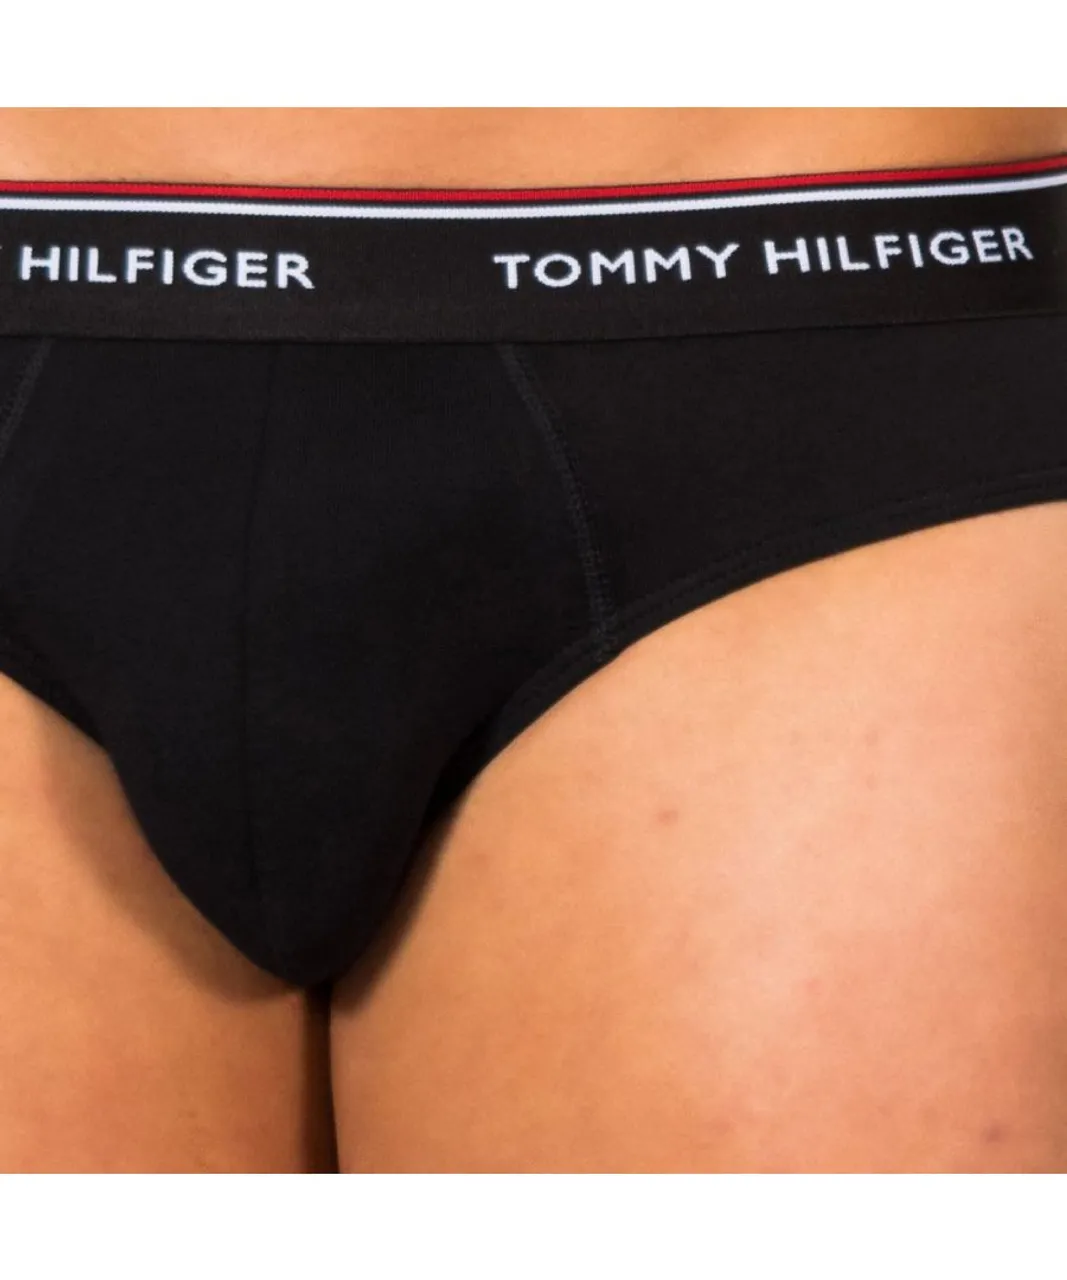 Tommy Hilfiger Mens Pack-3 Slips breathable fabric and anatomical front 1U87903766 man - Black